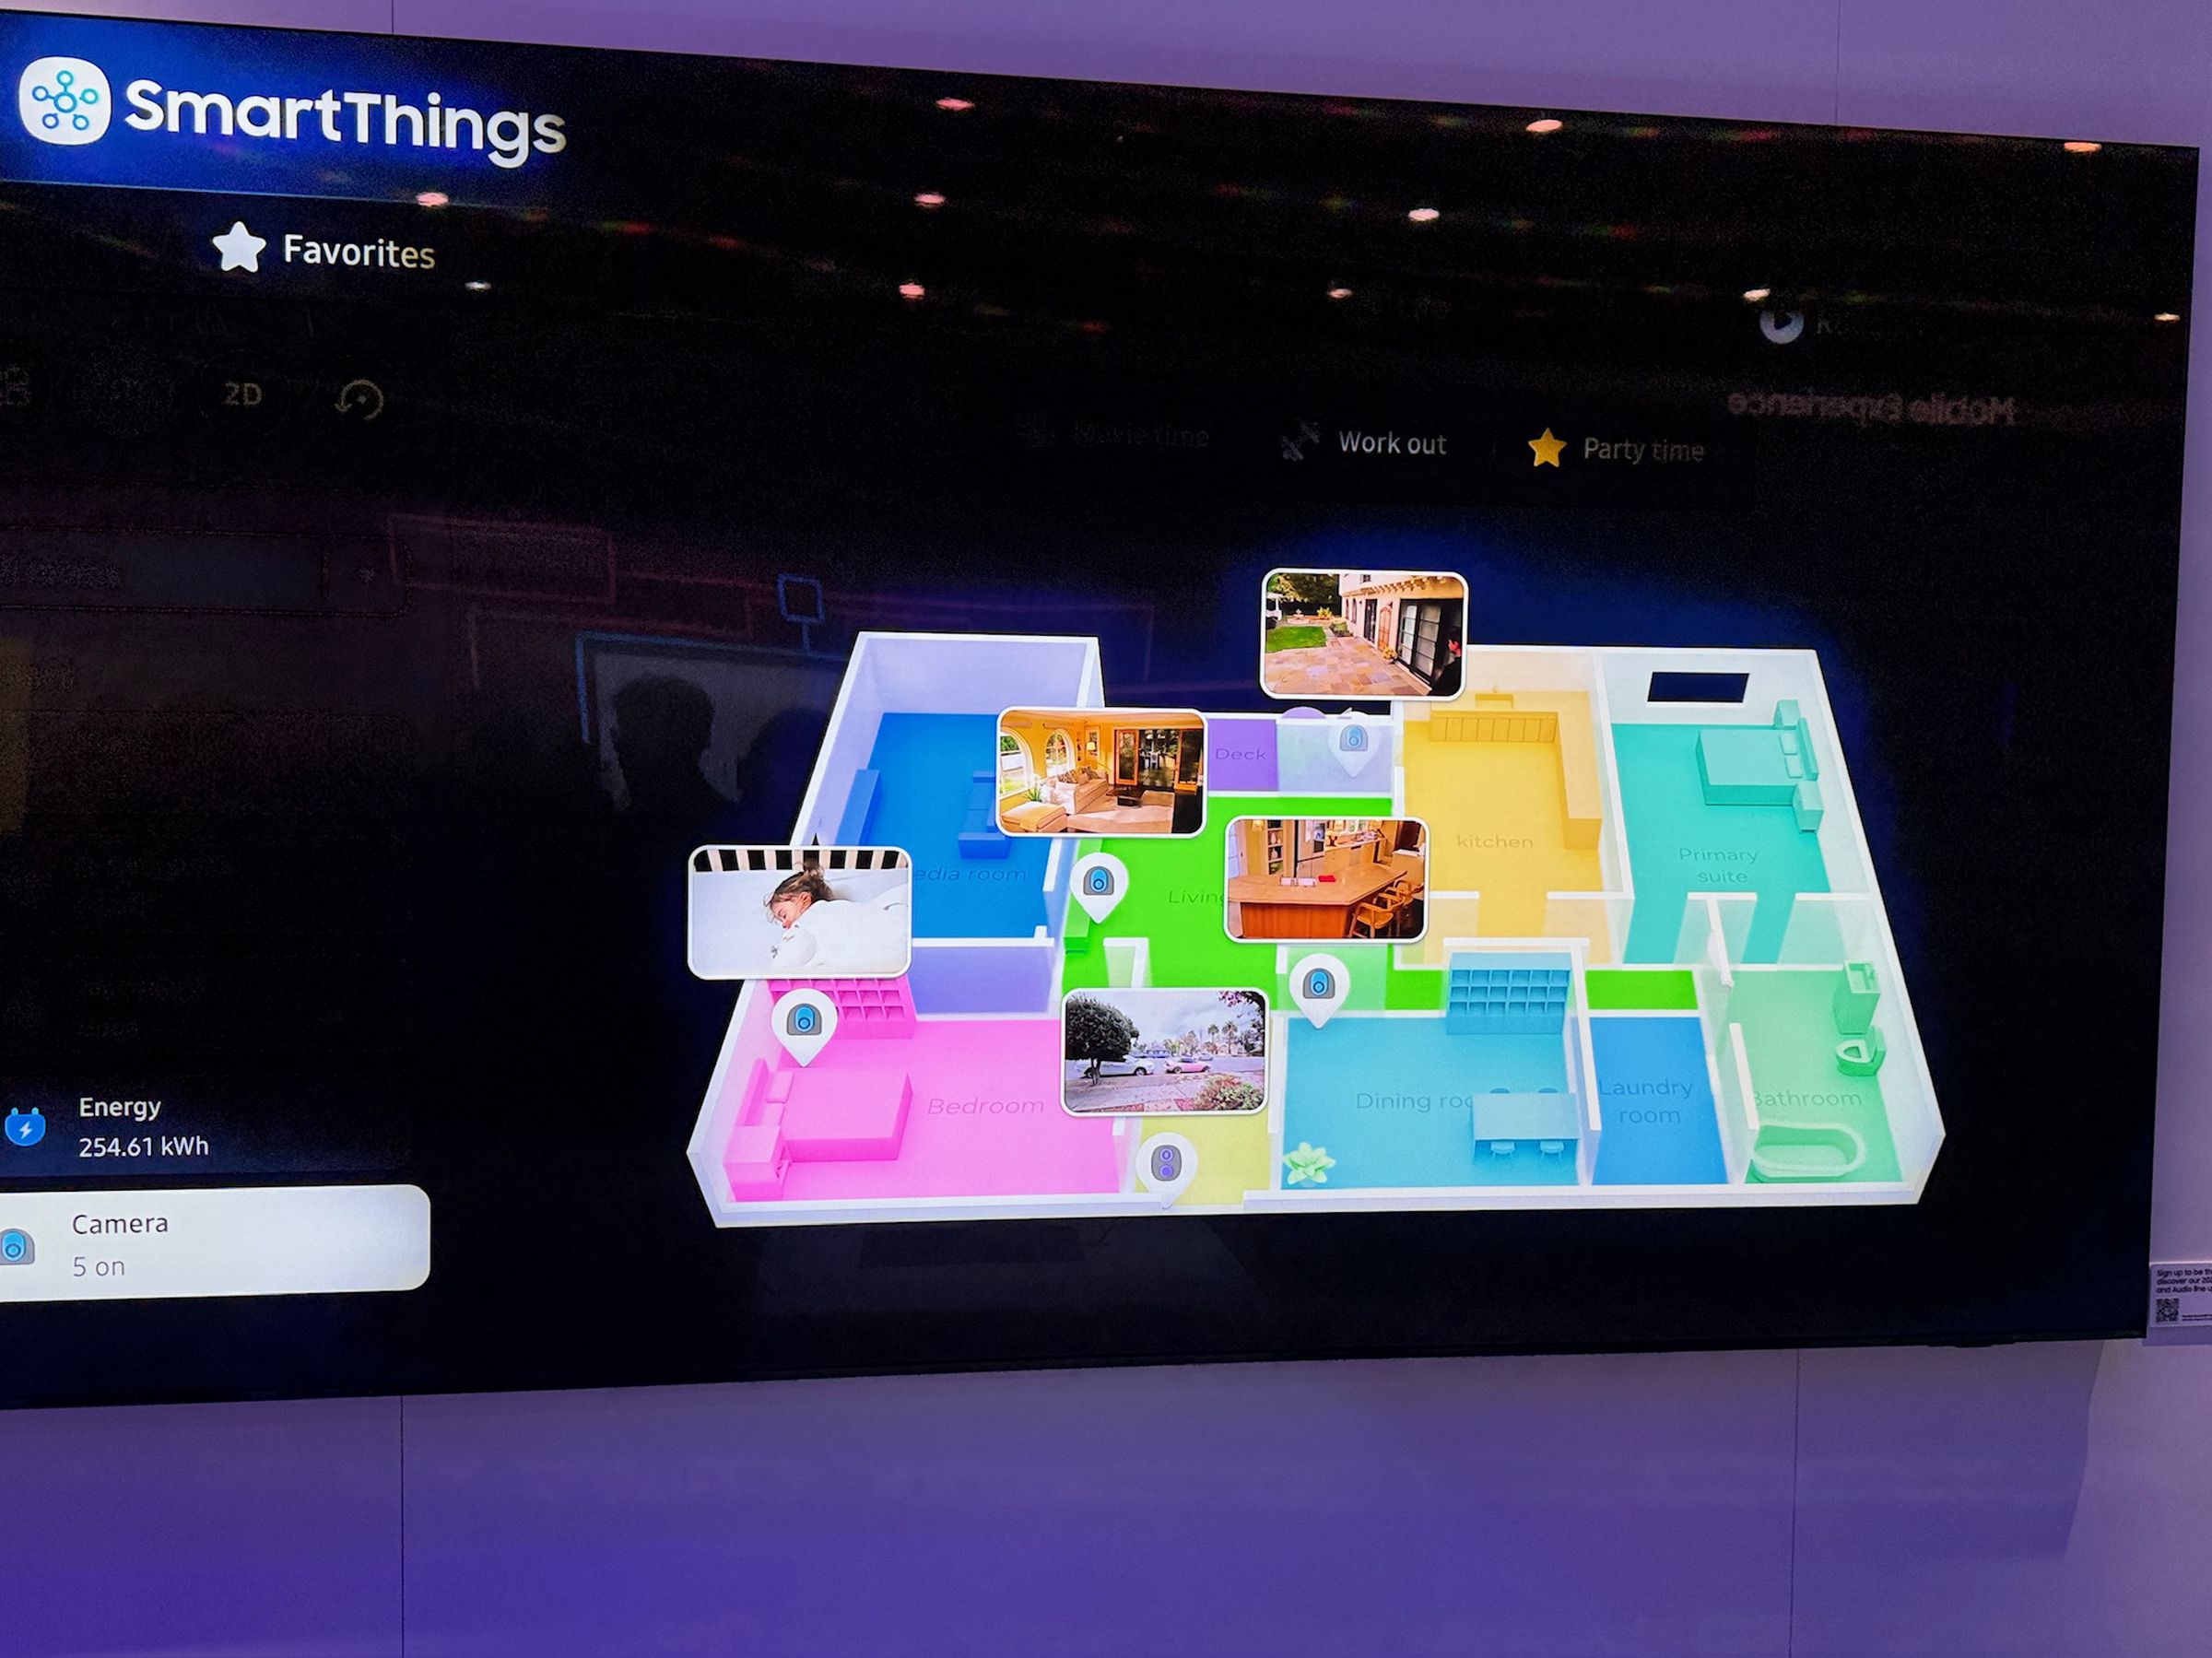 Samsung’s Map View lets you select device types and see status of all compatible devices. This is the camera view.